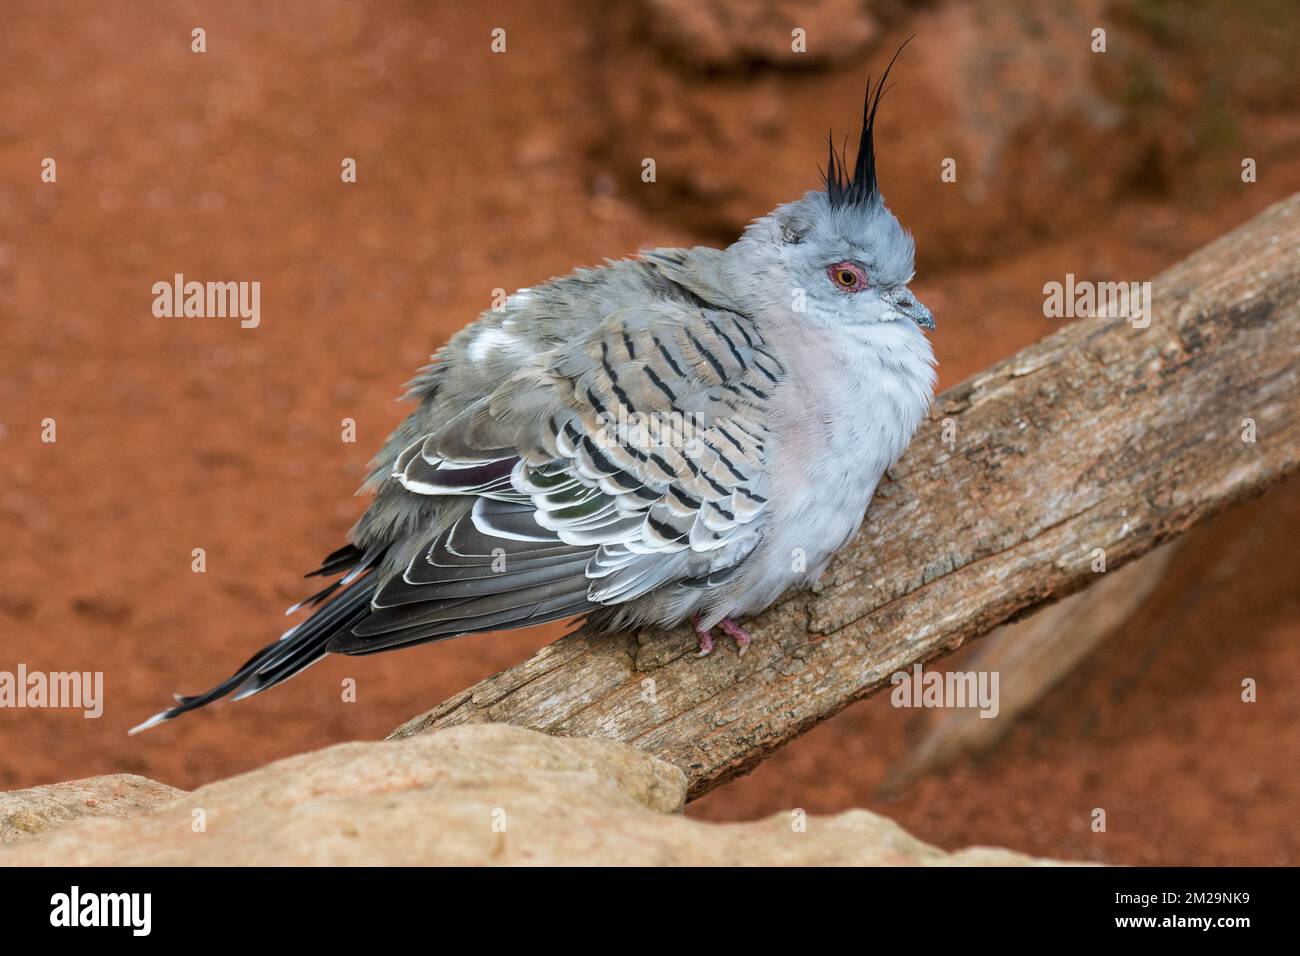 Crested pigeon (Ocyphaps lophotes) native to Australia | Colombine longup / Colombe lophote (Ocyphaps lophotes / Geophaps lophotes) de l'Australie 17/09/2017 Stock Photo